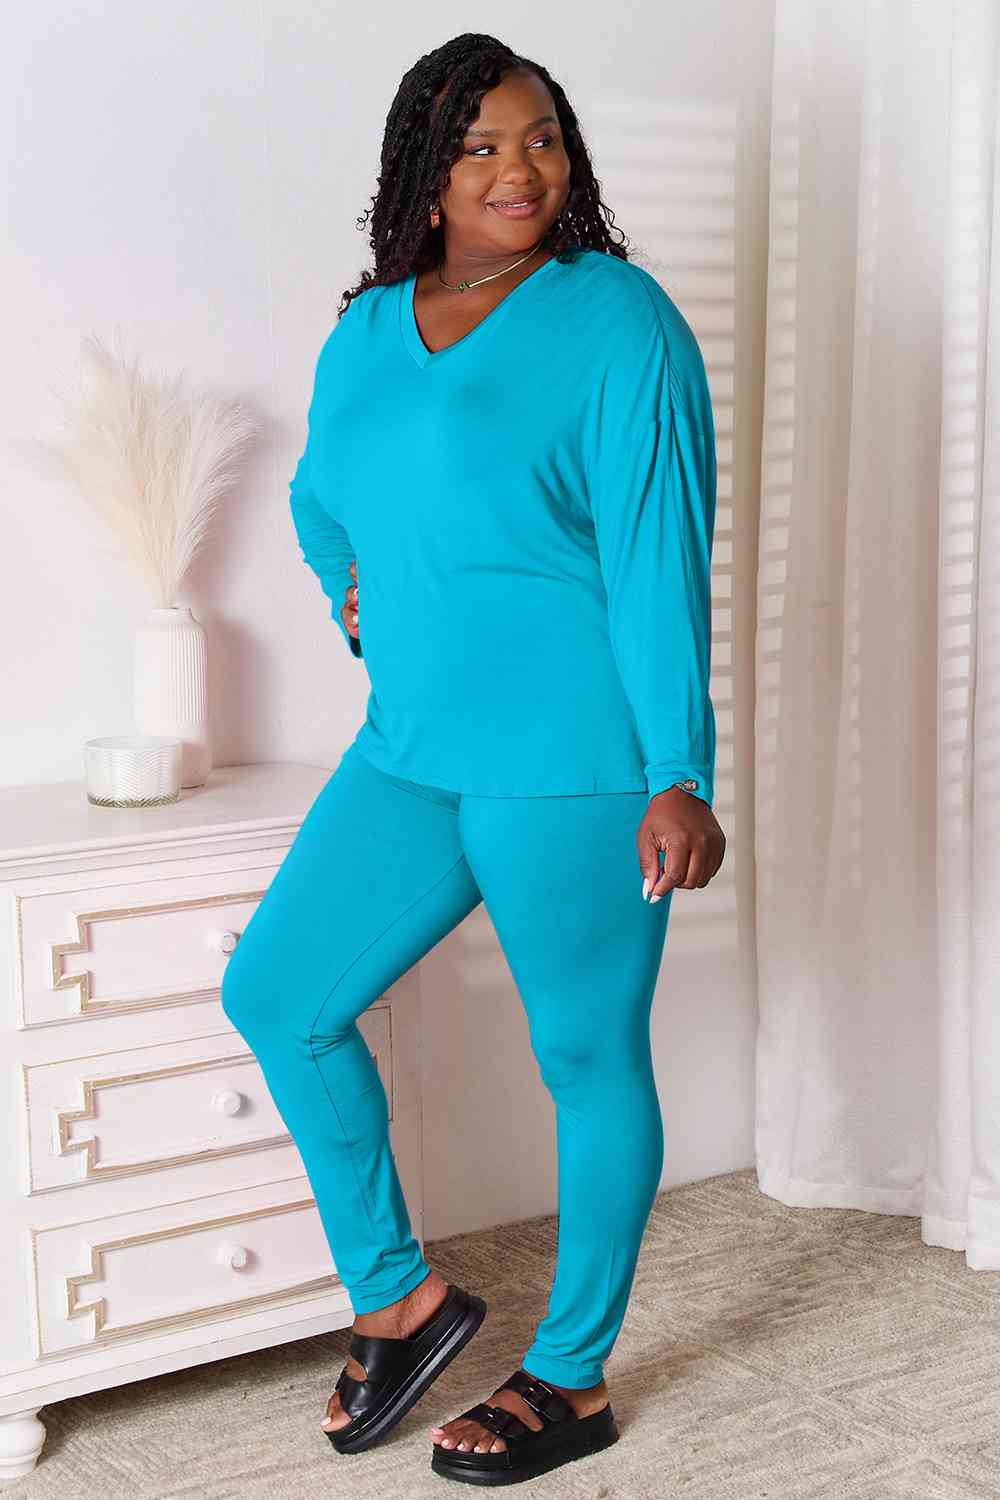 V-Neck Soft Rayon Long Sleeve Top and Pants Lounge Set - Sky Blue / S - Bottoms - Outfit Sets - 13 - 2024